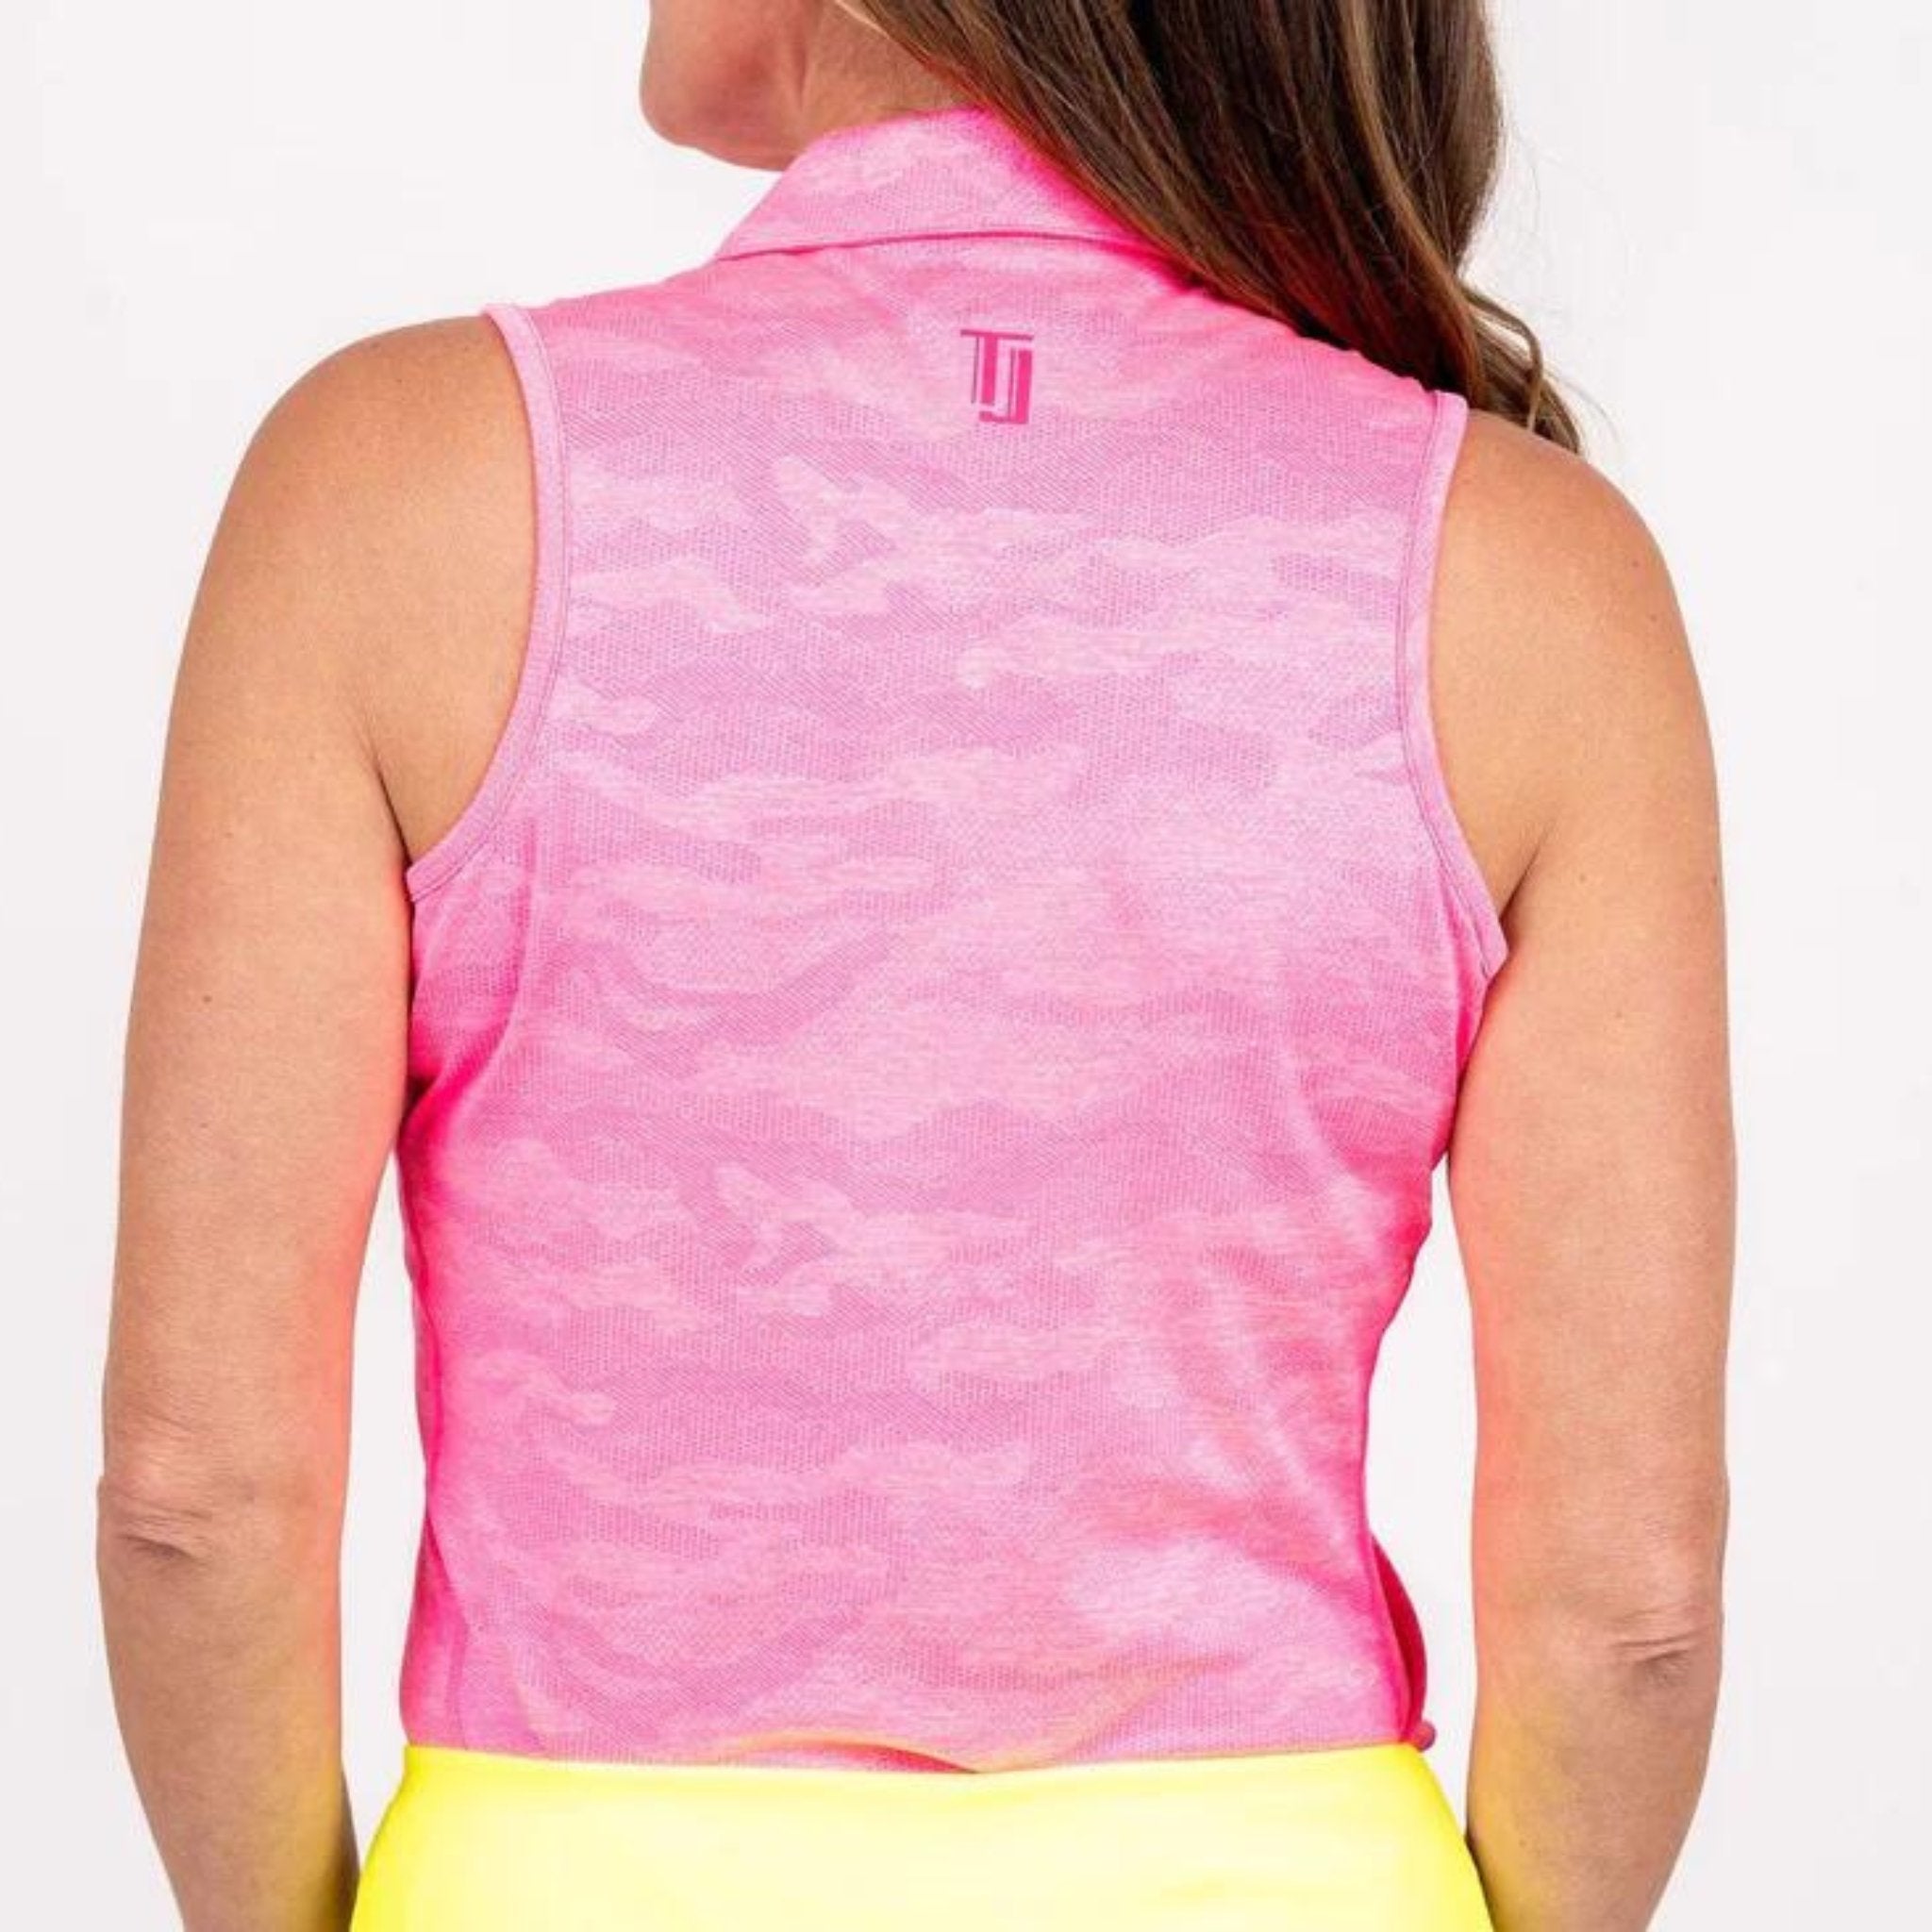 Ghost Camouflage Sleeveless - Bright Neon Pink - Fairway Fittings